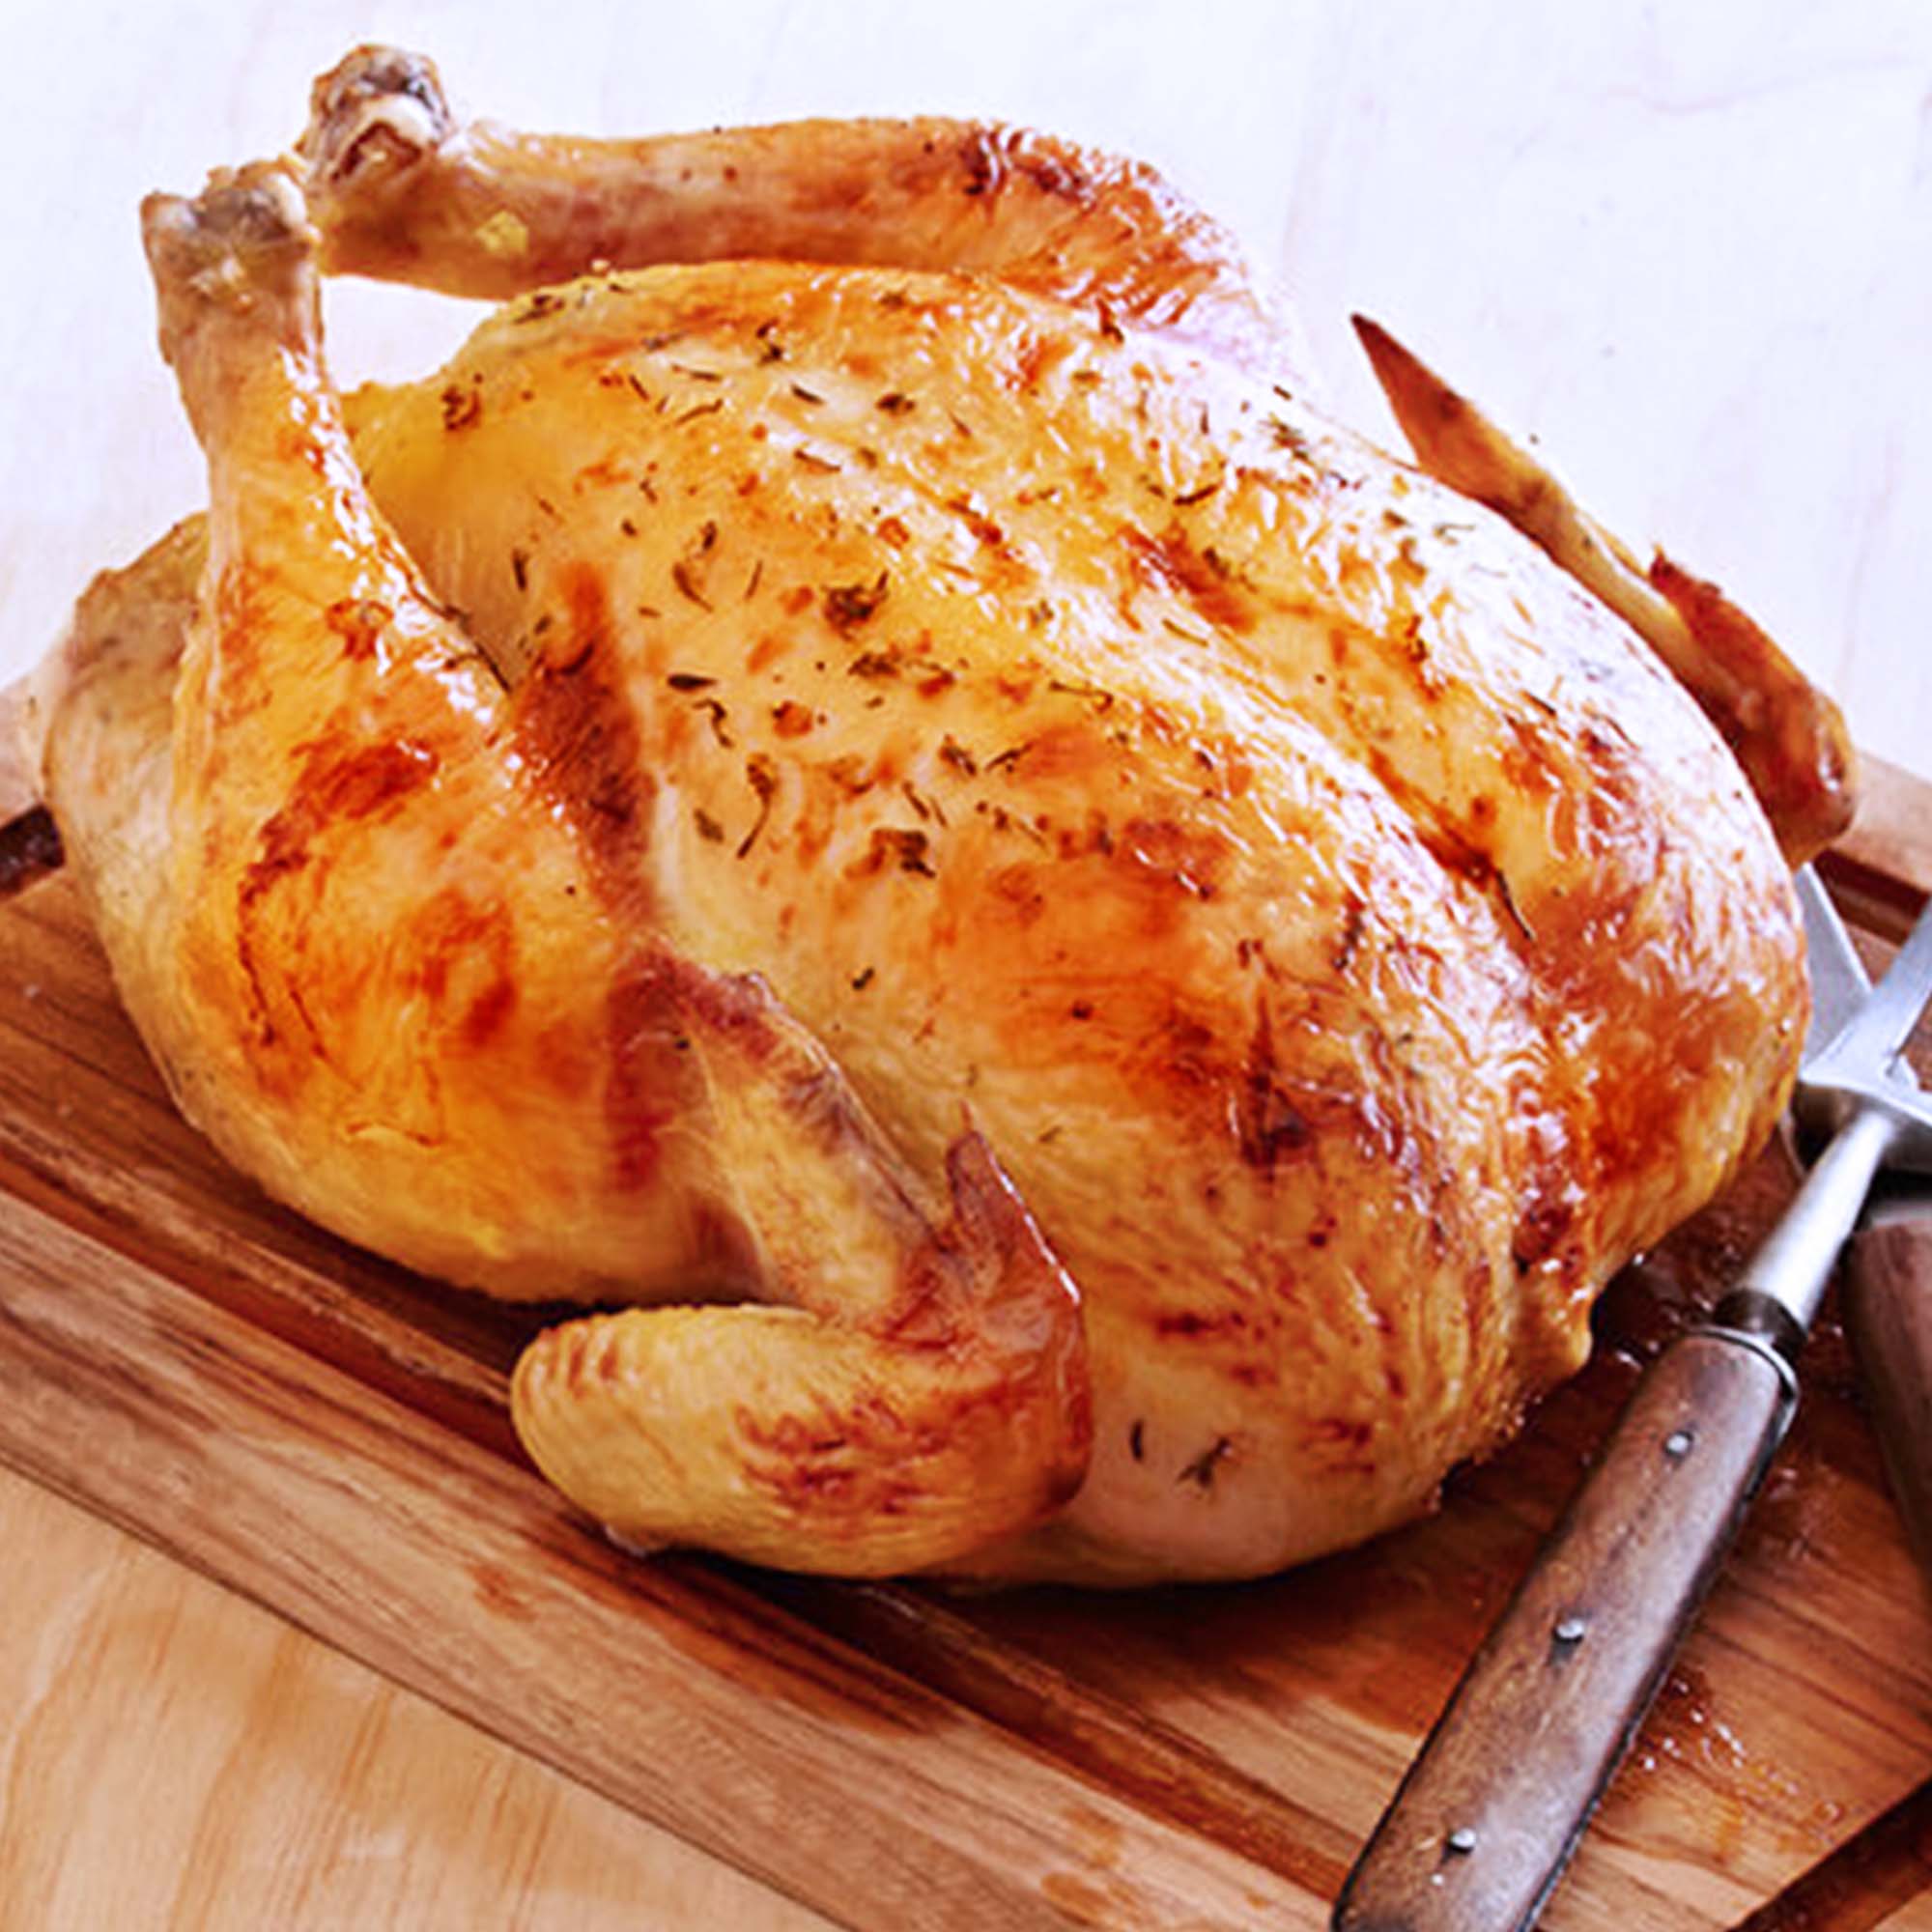 https://www.perduefarms.com/on/demandware.static/-/Sites-masterCatalog_perdue/default/dw2e566949/images/product-images/70357_perdue_harvestland_organic_whole_chicken_with_giblets_and_necks_ckd_hero.jpg